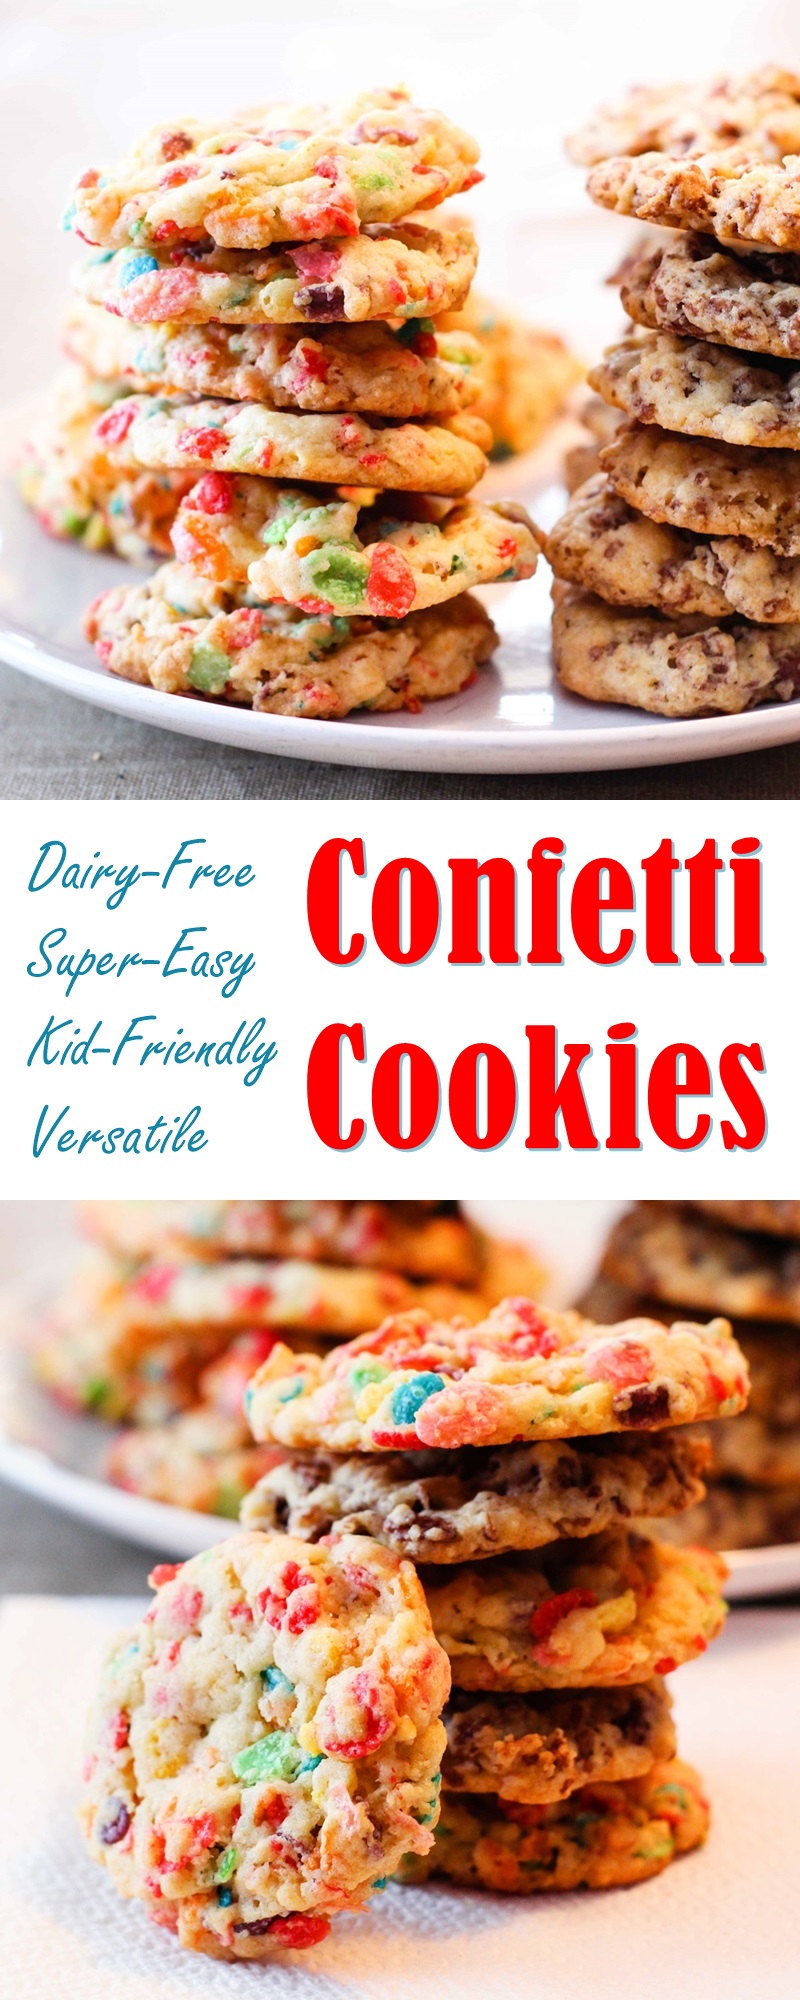 Confetti Cookies Recipe - a super-easy, dairy-free, hack recipe with vegan option! Kid-friendly and party-ready.